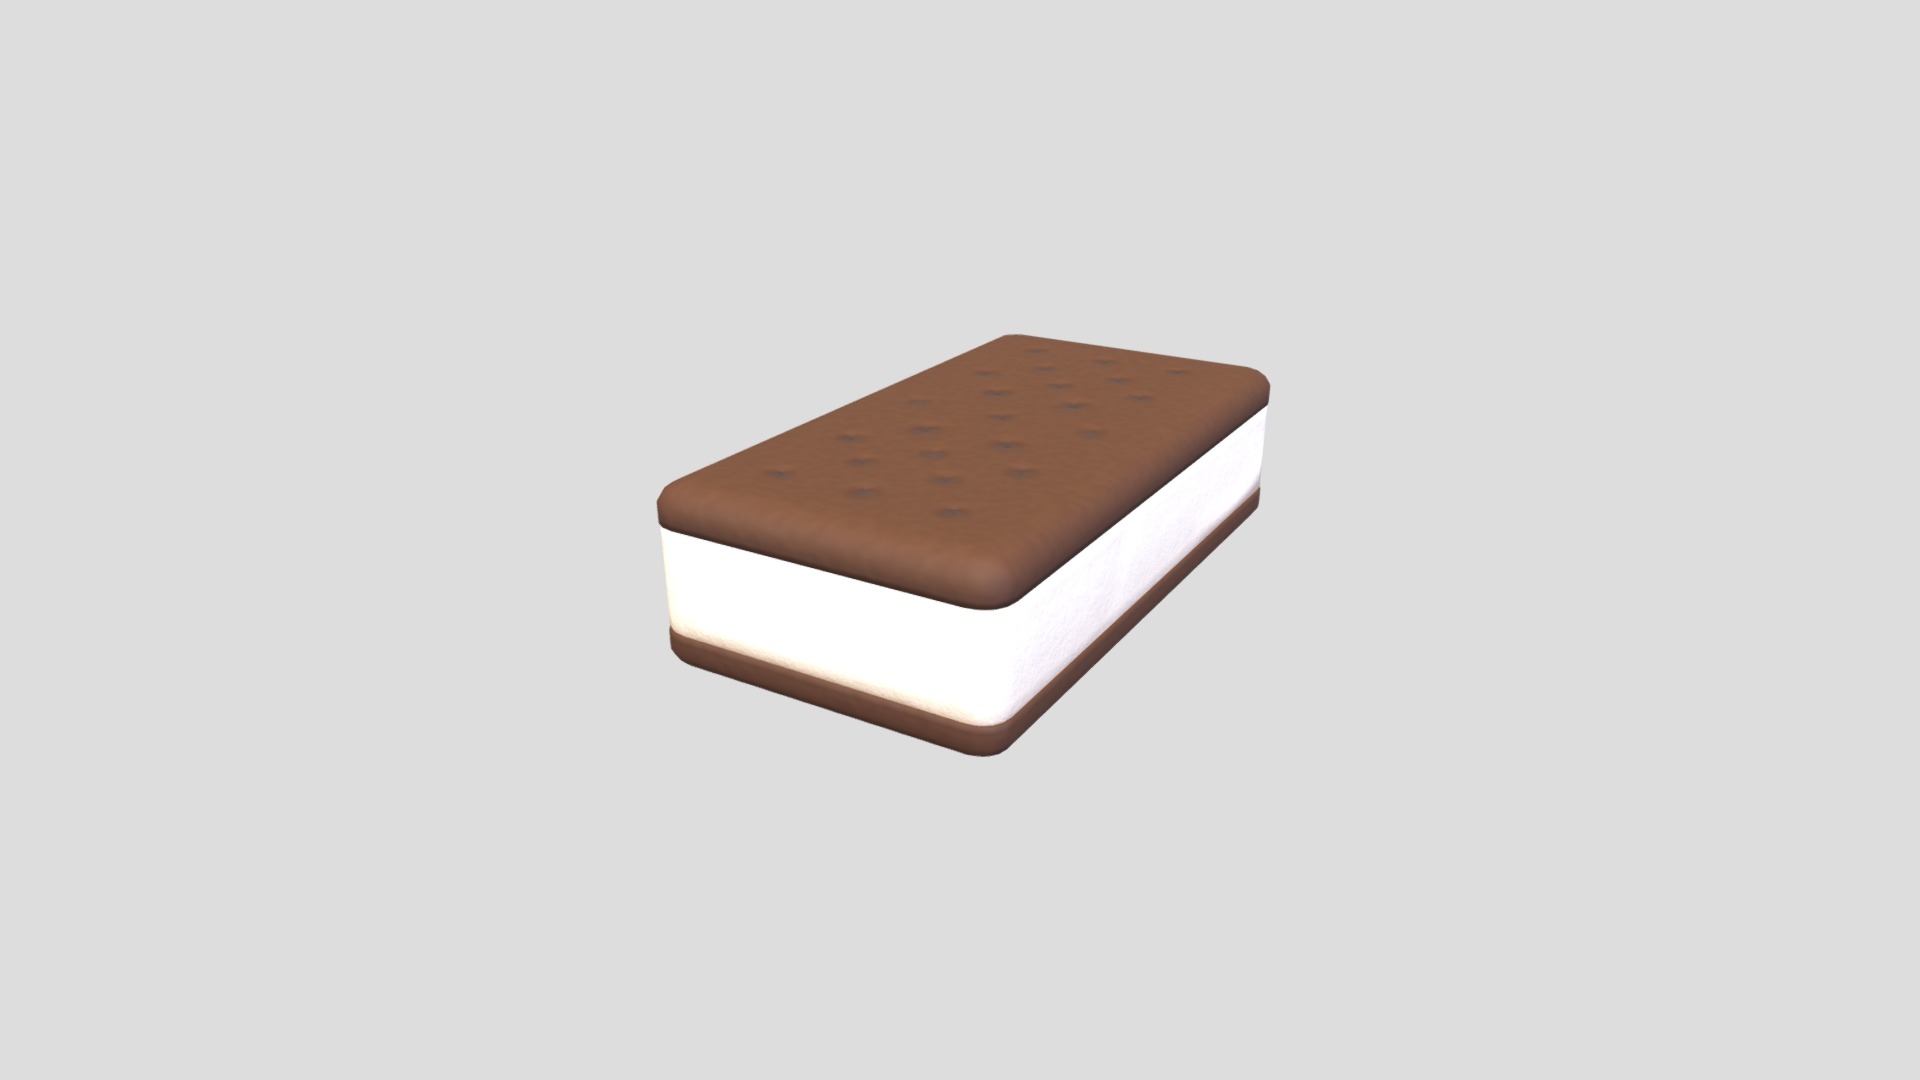 3D model Ice Cream Sandwich - This is a 3D model of the Ice Cream Sandwich. The 3D model is about a wooden box with a lid.